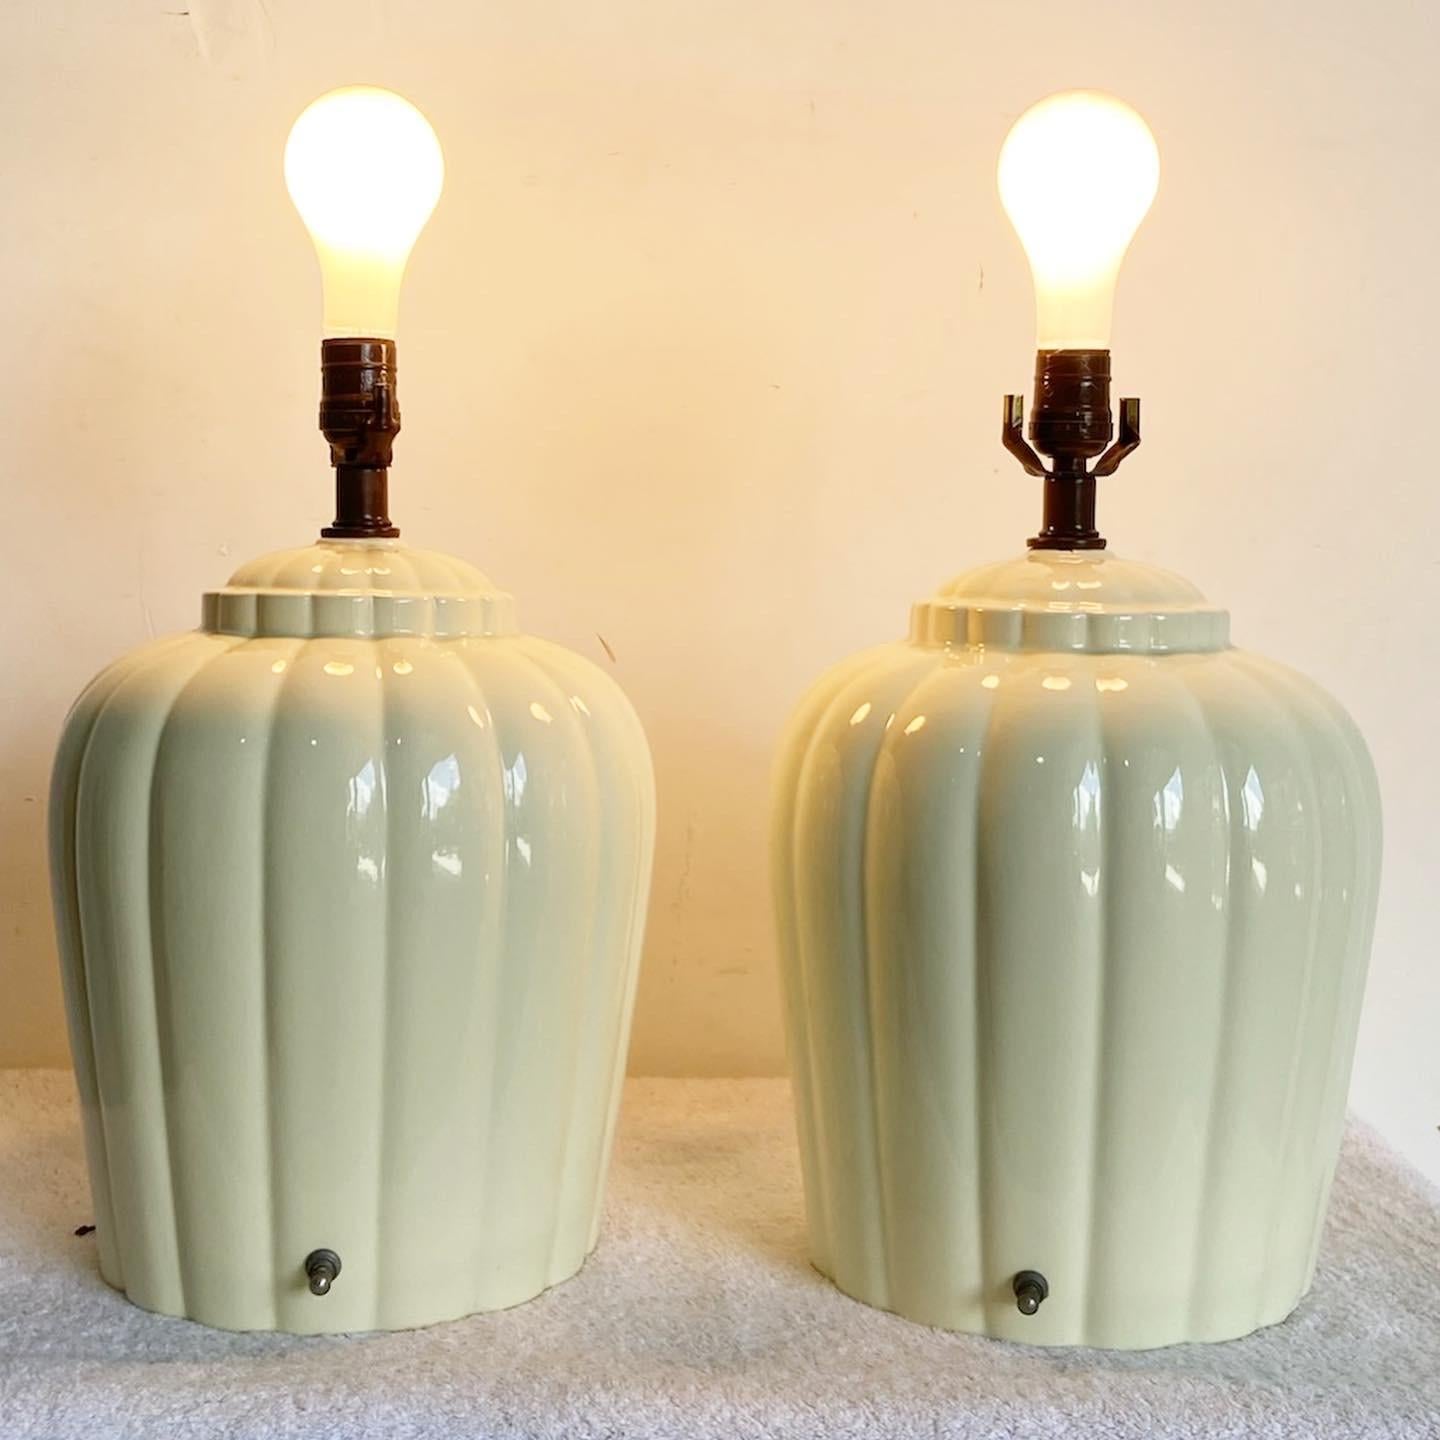 Post-Modern Postmodern Scalloped Cream Ceramic Table Lamps – a Pair For Sale